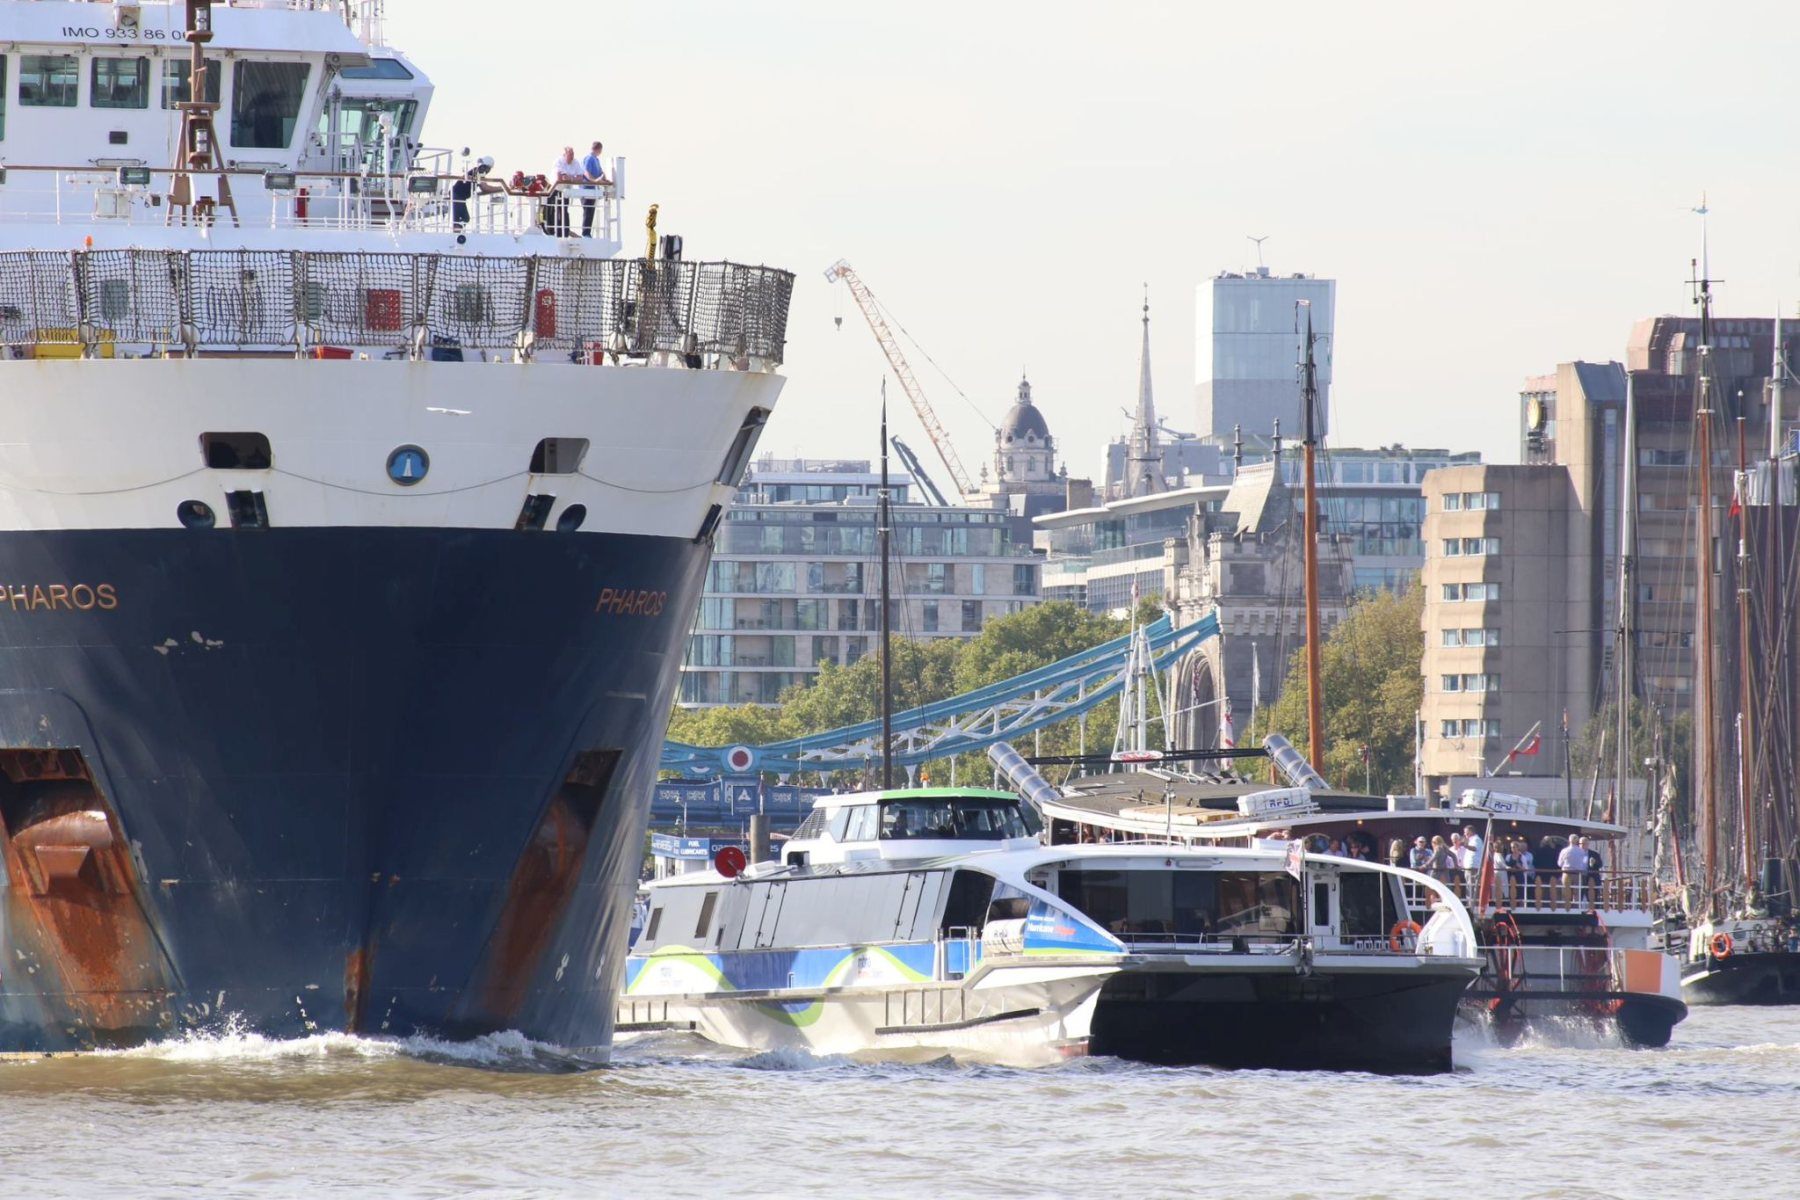 Ship NLV Pharos visiting River Thames, London 14-Sep-2019.  Next to a Thames Clipper fast ferry